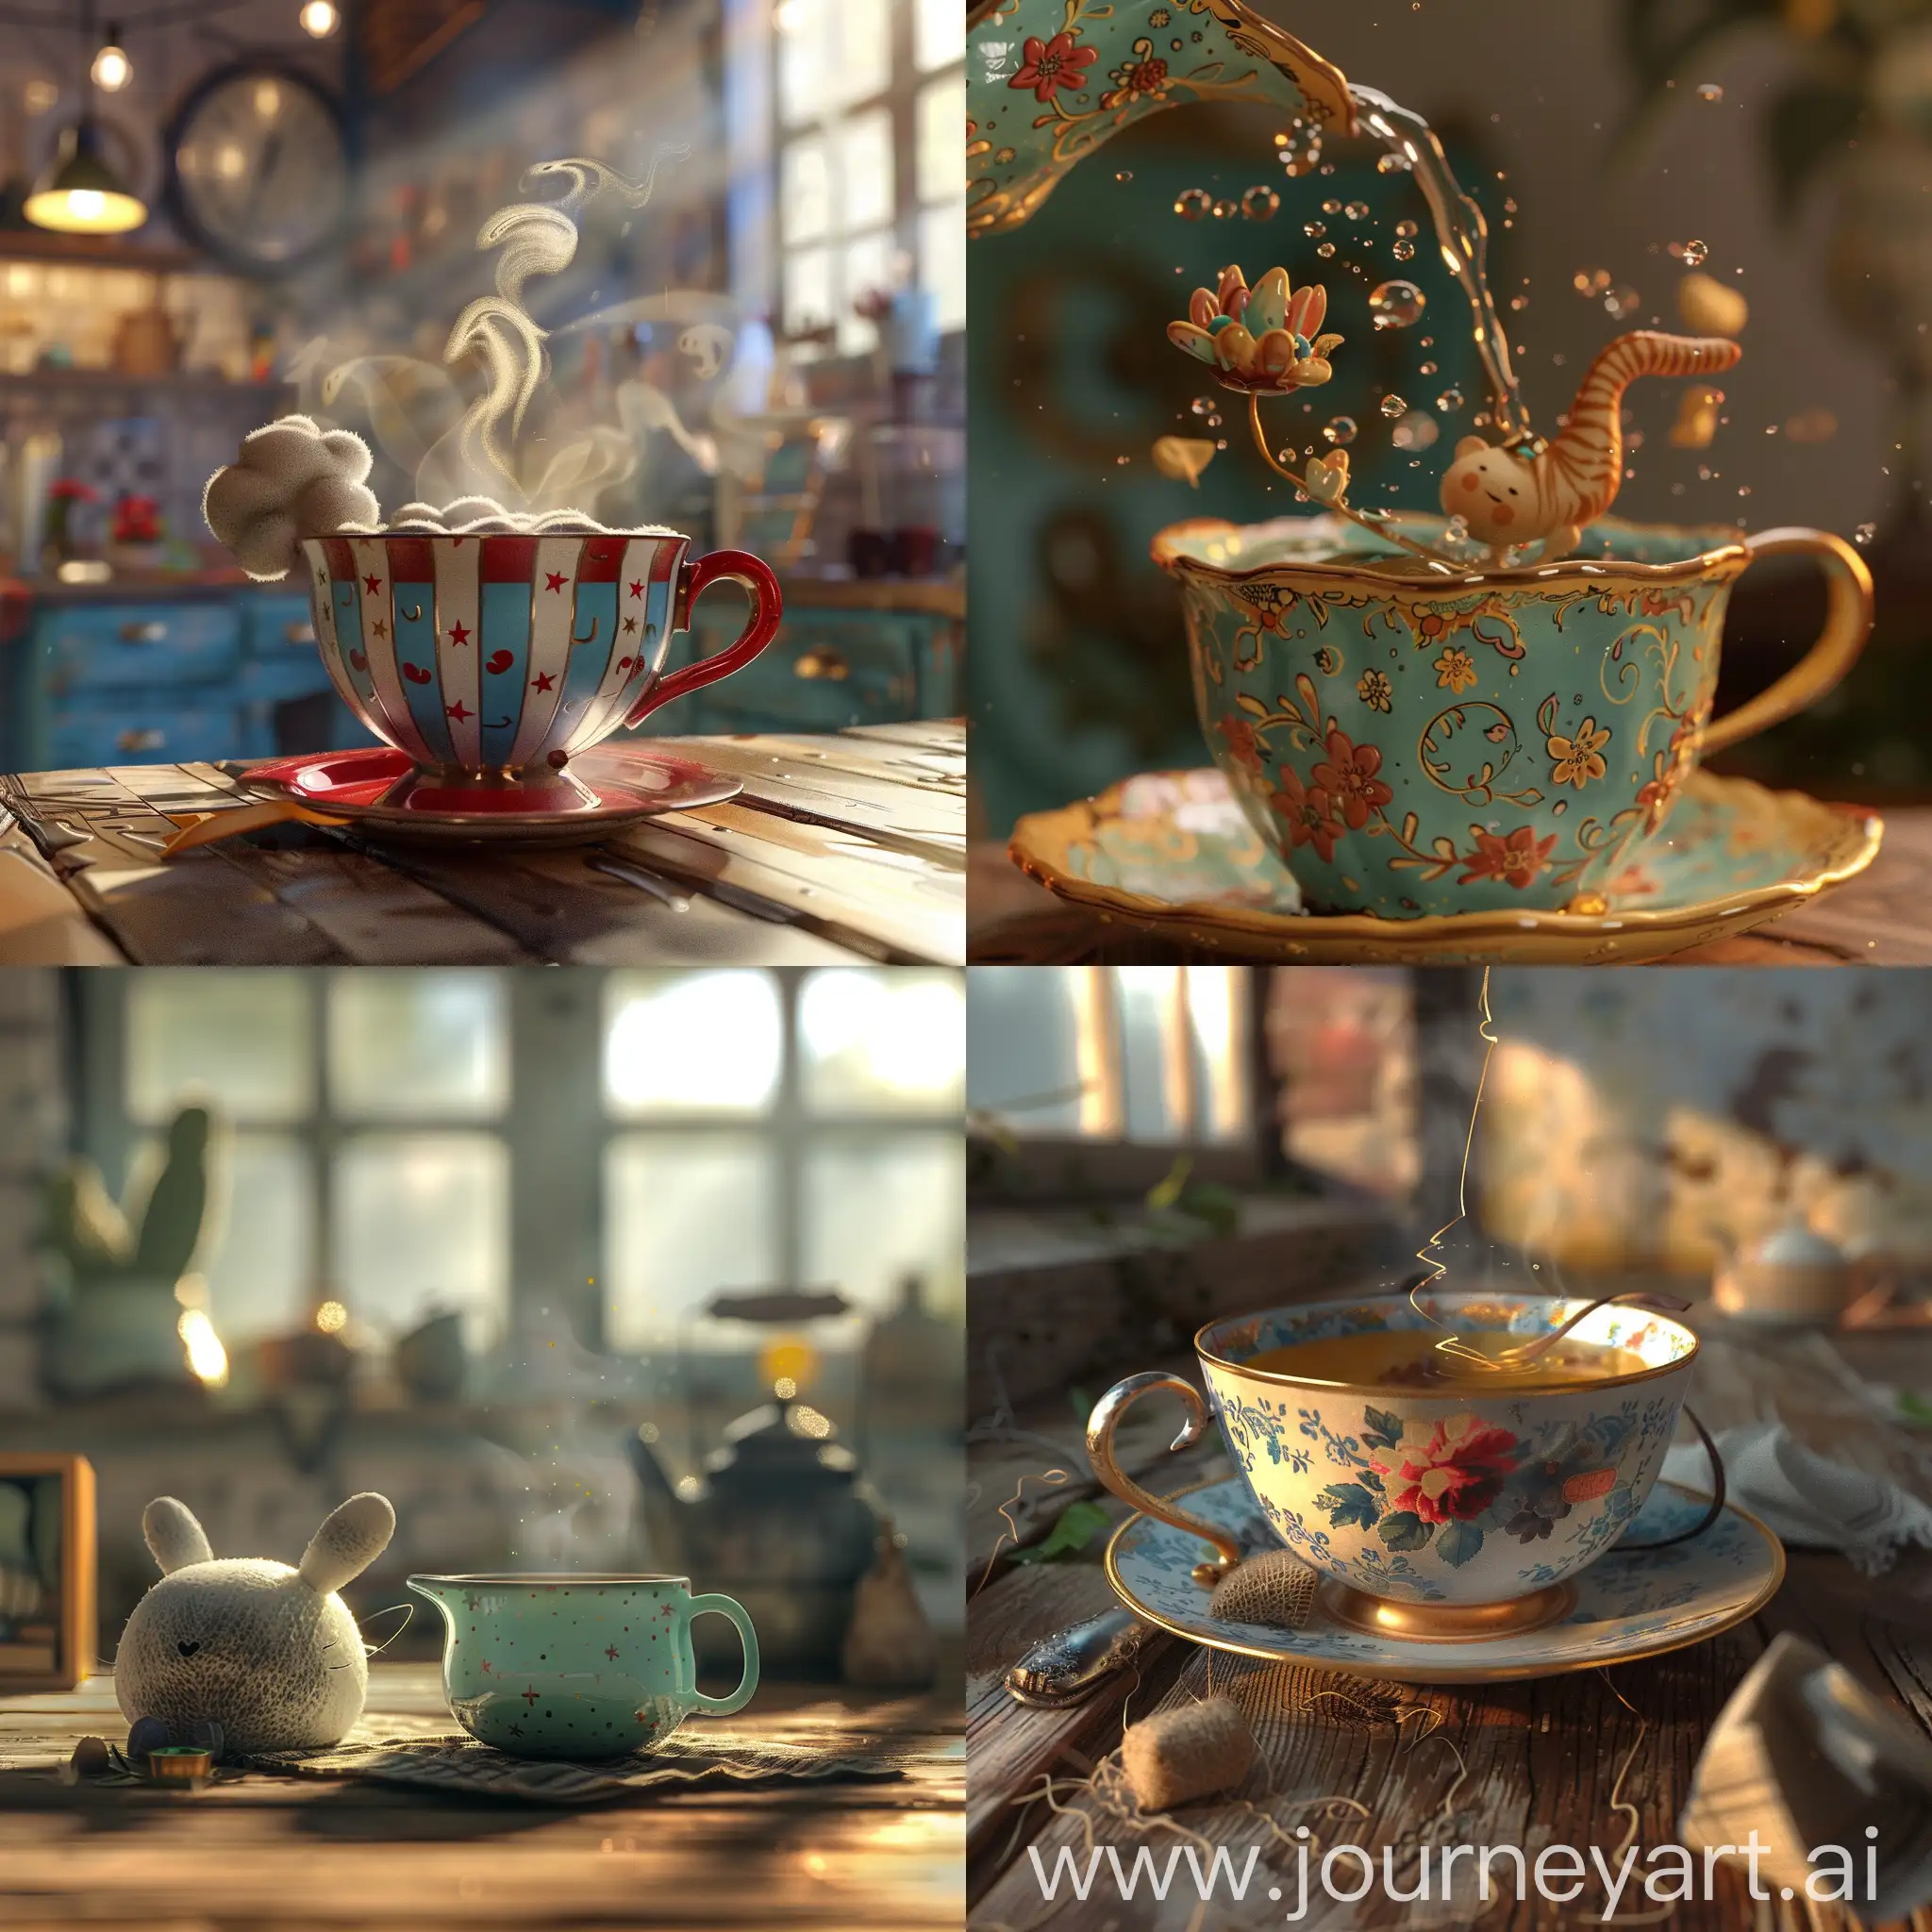 Quirky-3D-Animation-Tea-Time-Surprise-with-Sock-in-the-Cup